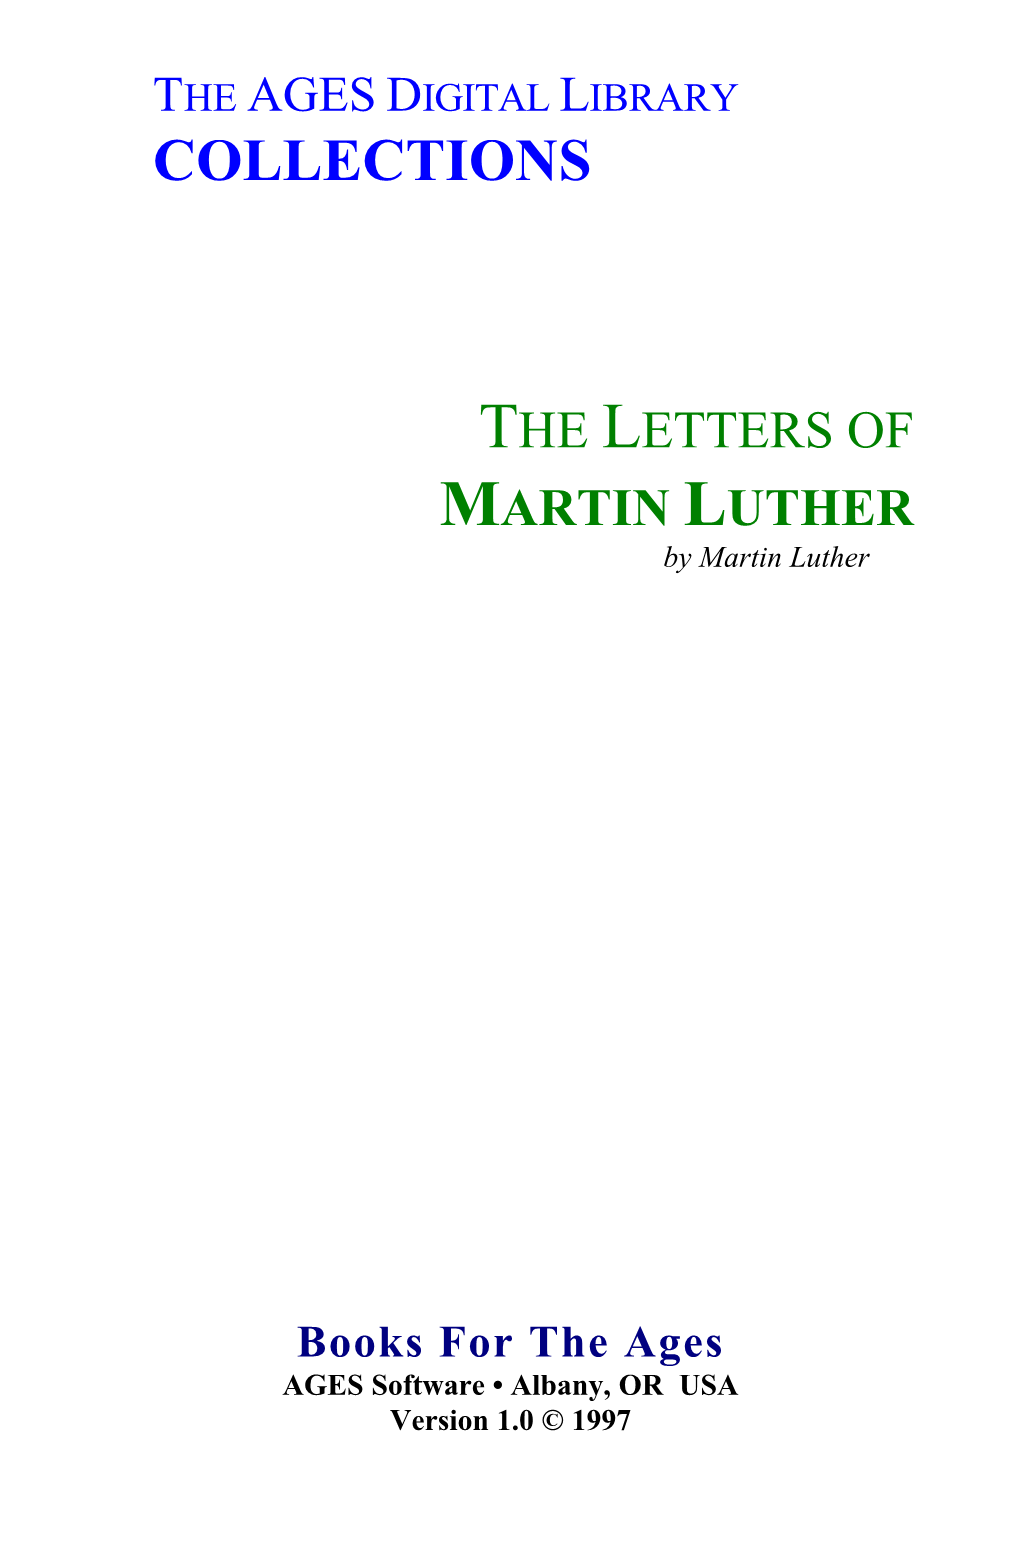 THE LETTERS of MARTIN LUTHER by Martin Luther